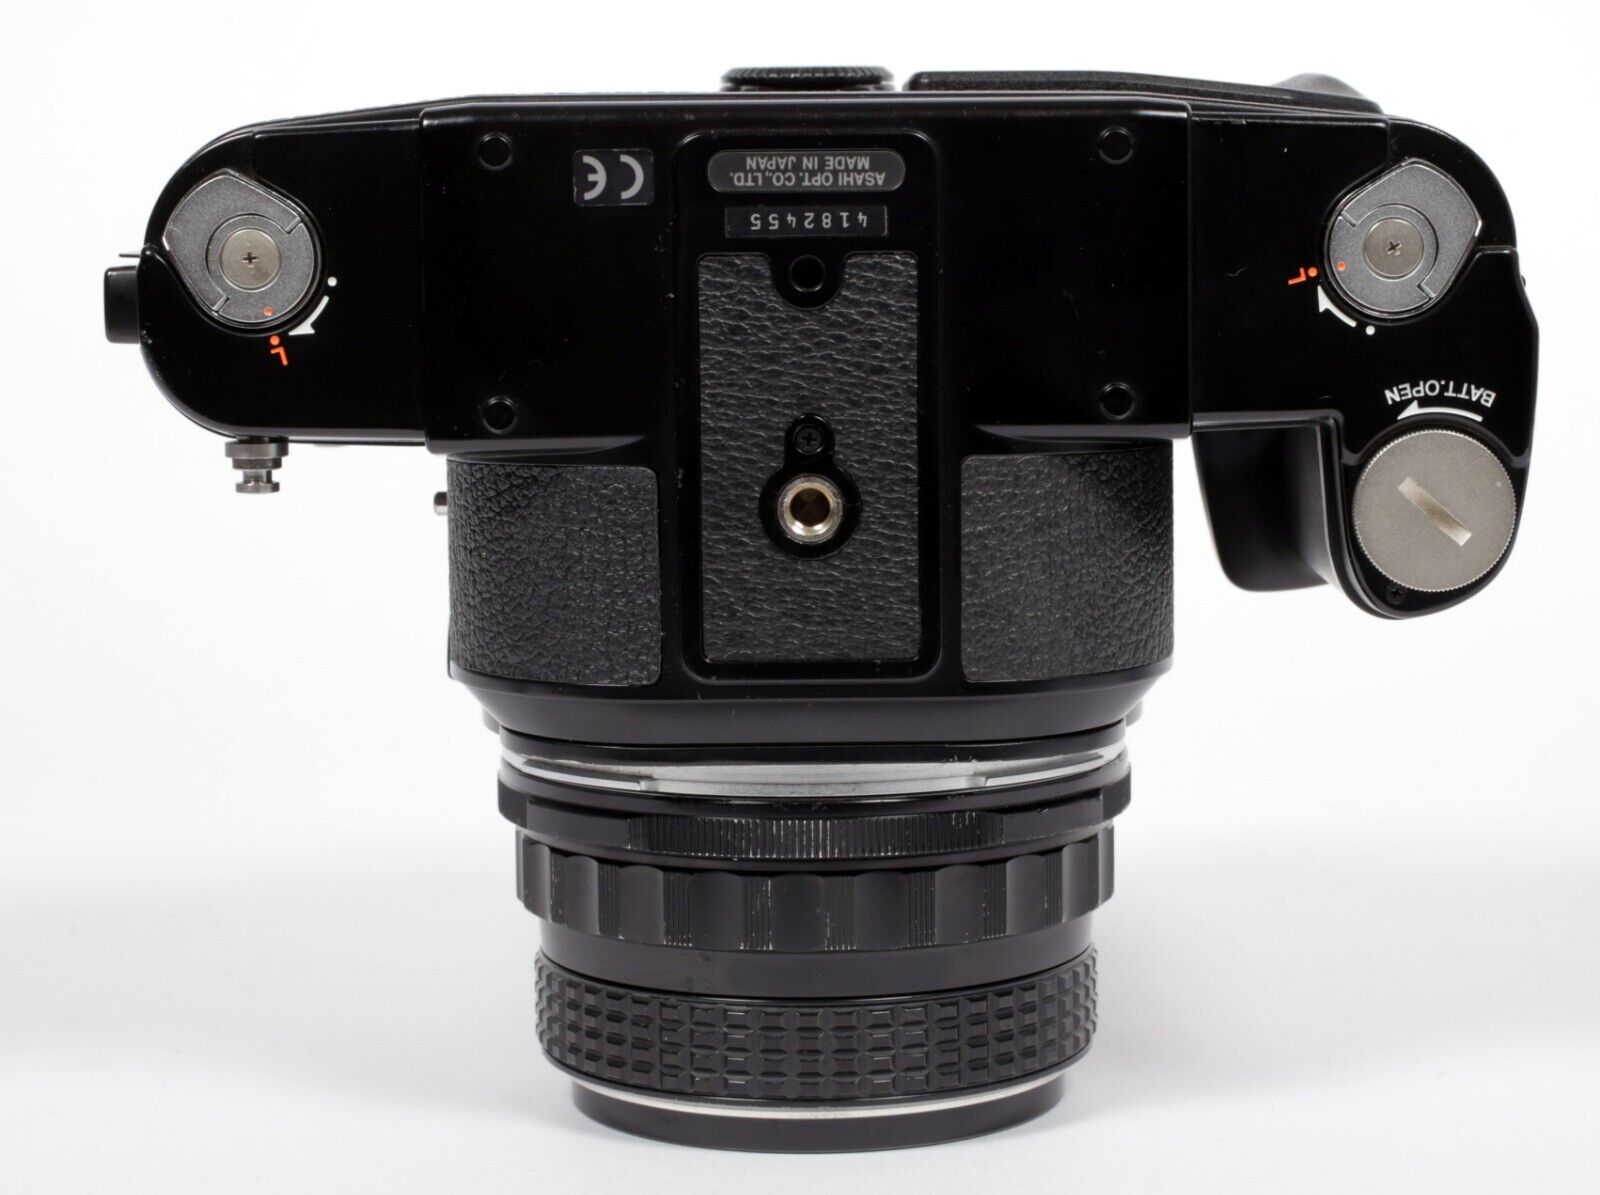 Pentax 67 II 6X7 camera with SMC 90mm F2.8 lens #455 | CatLABS